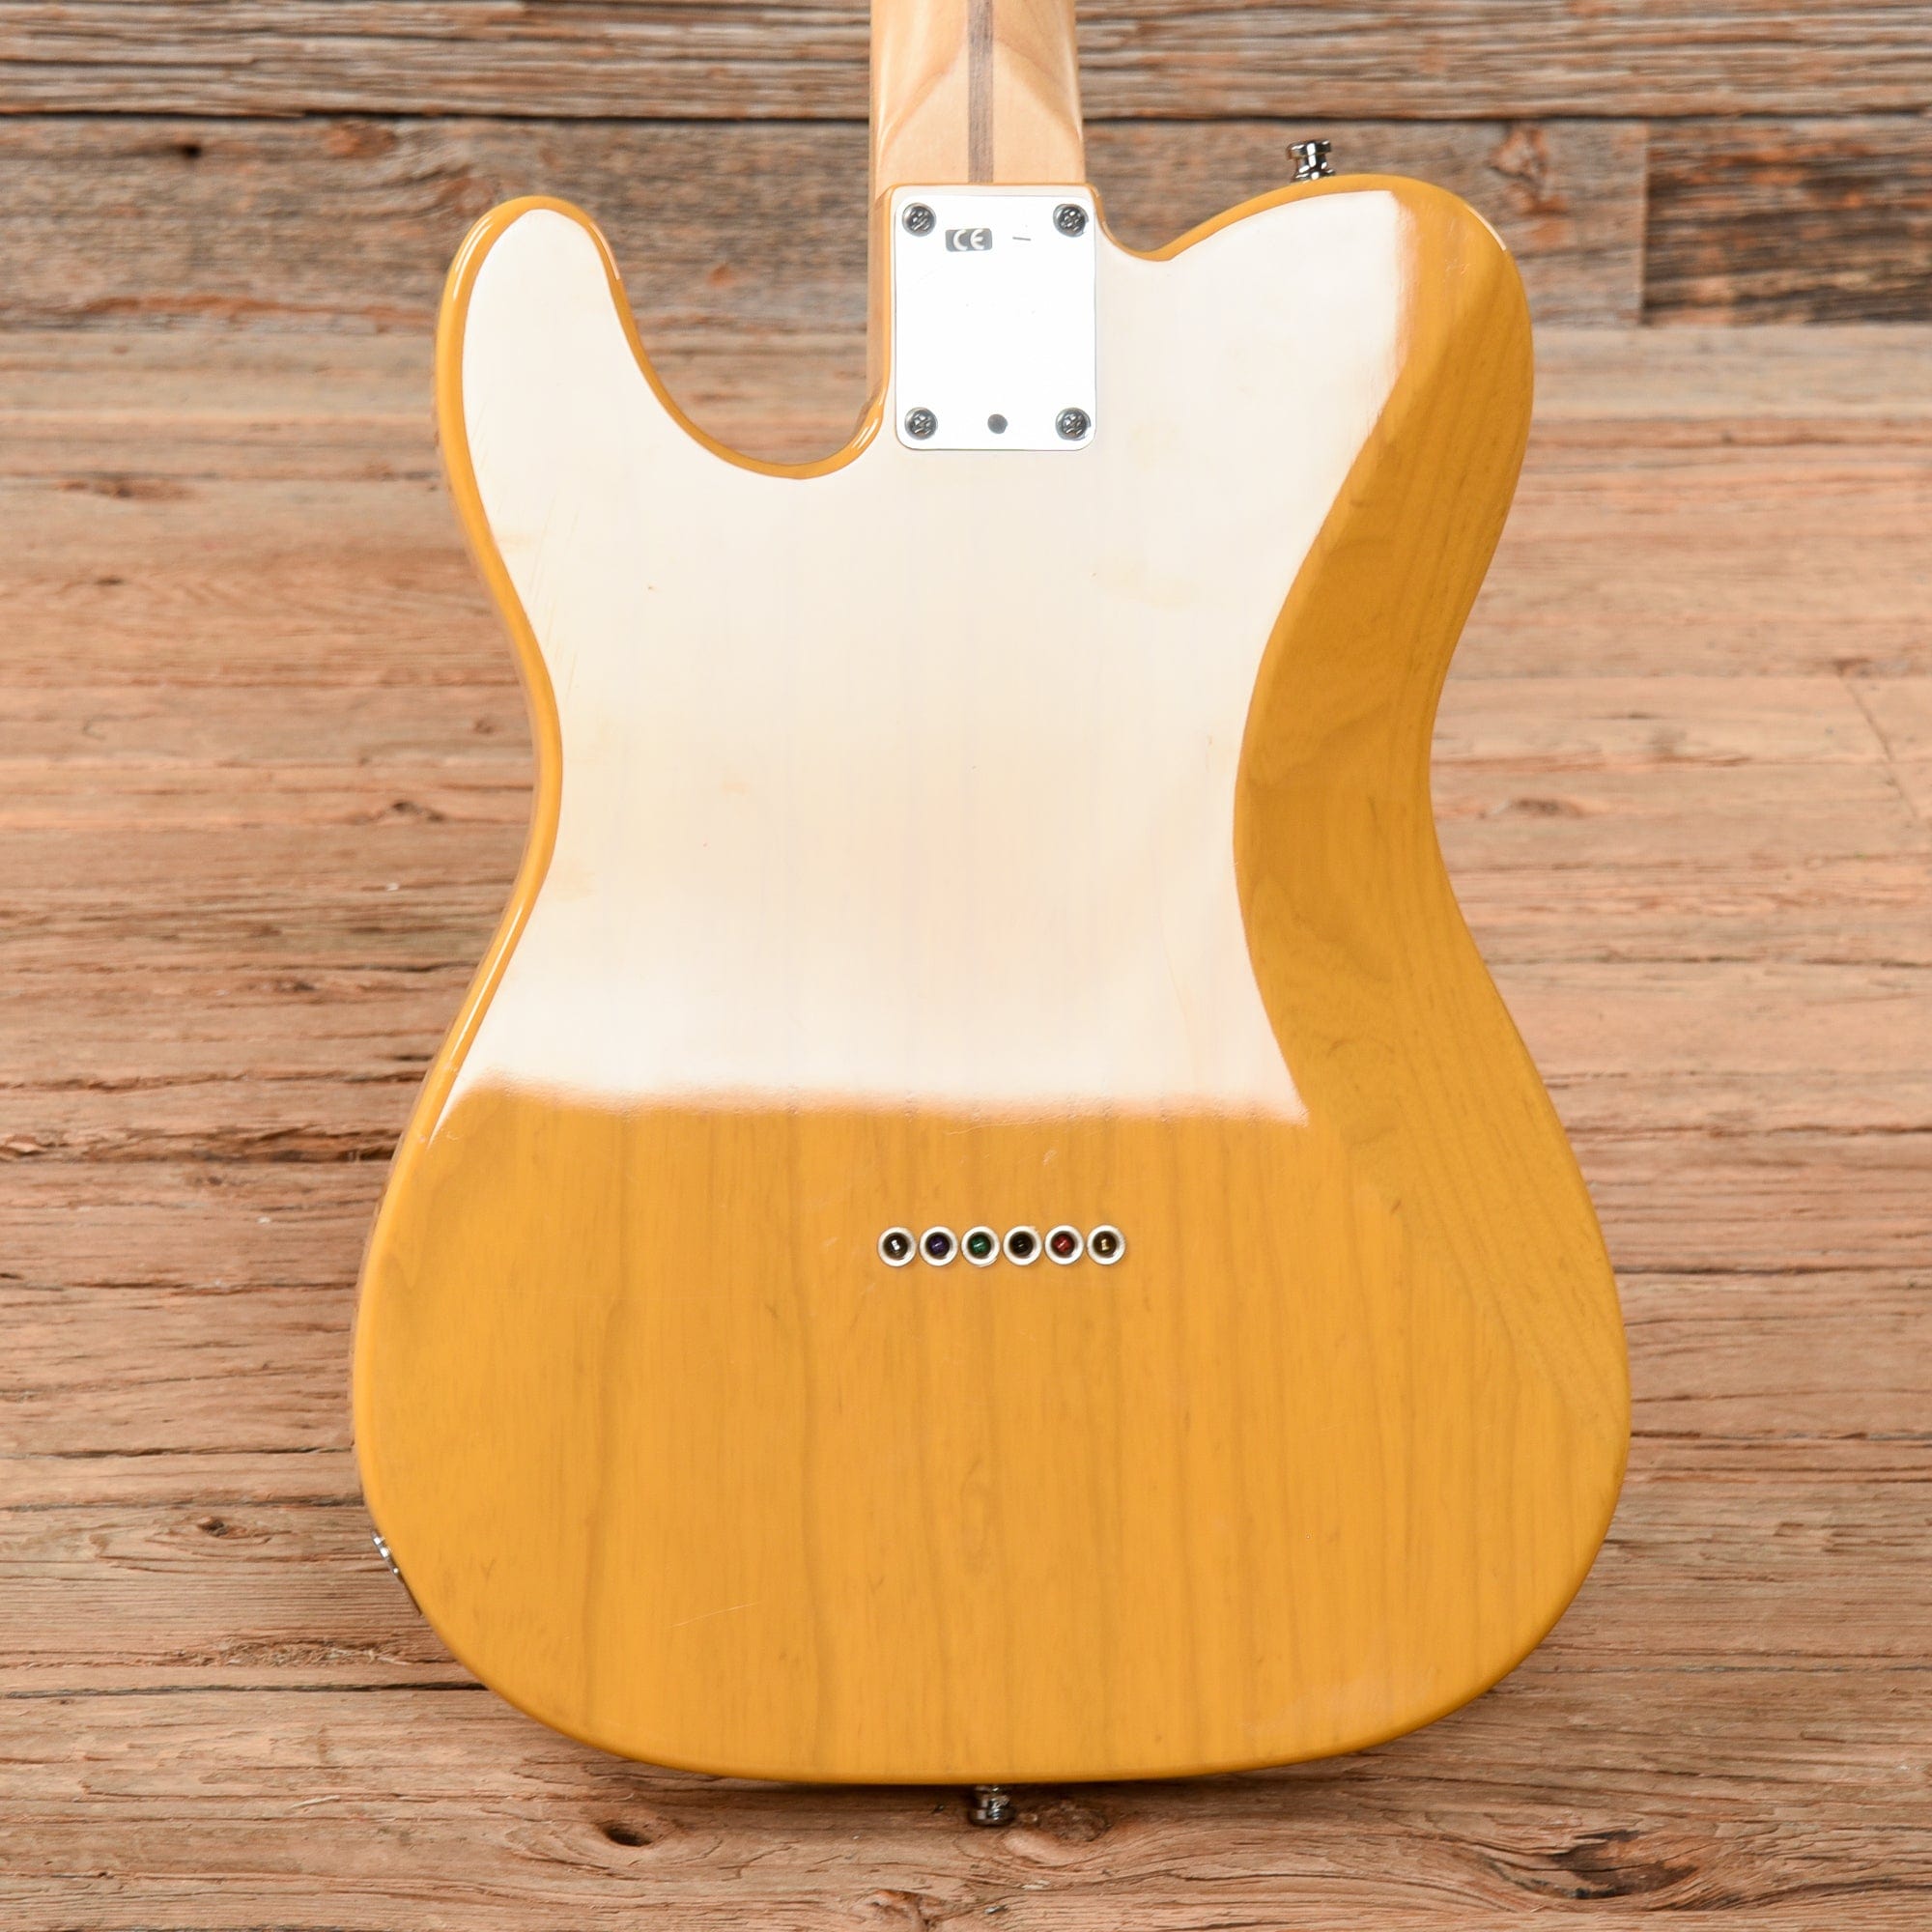 Fender American Deluxe Telecaster Butterscotch Blonde 2014 Electric Guitars / Solid Body